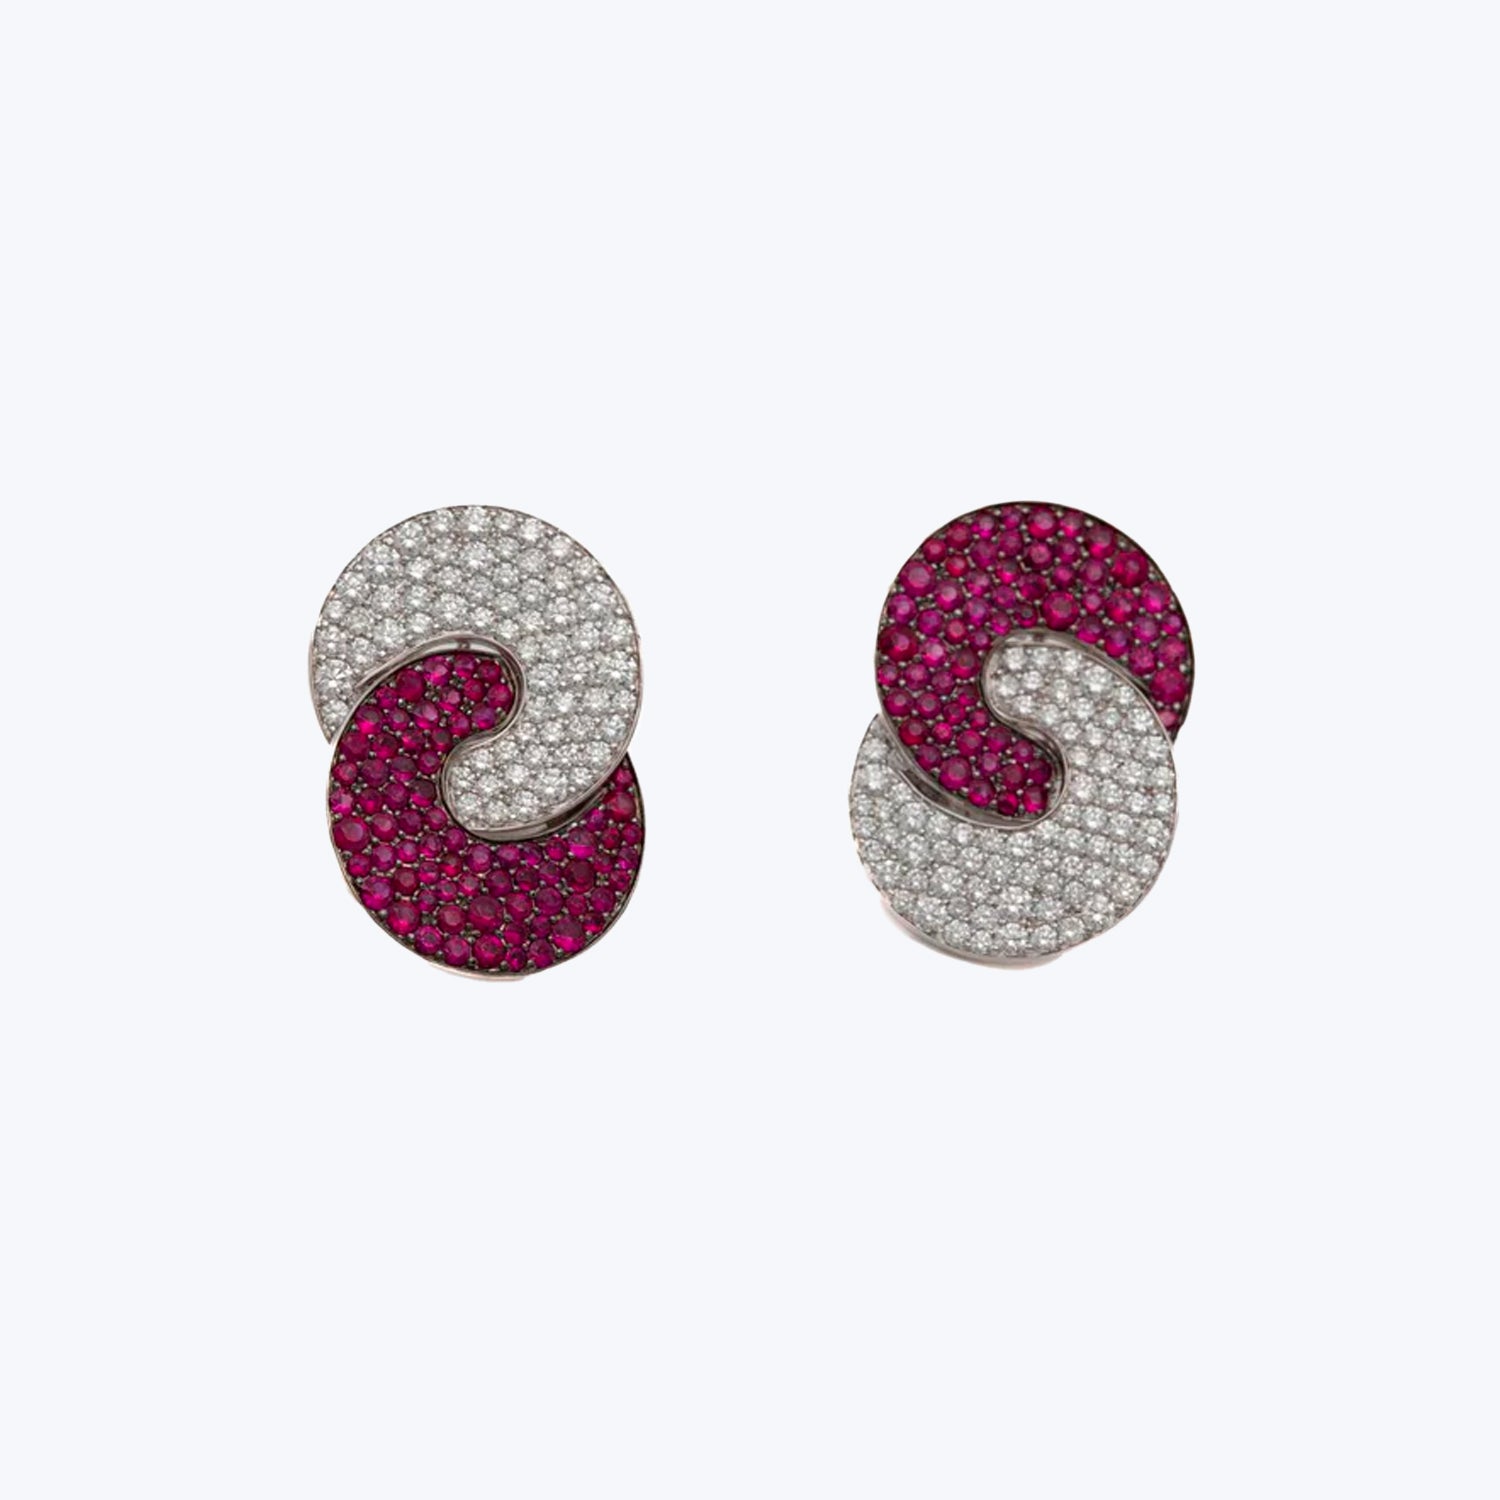 Stunning spiral earrings with pink and clear gemstone embellishments.